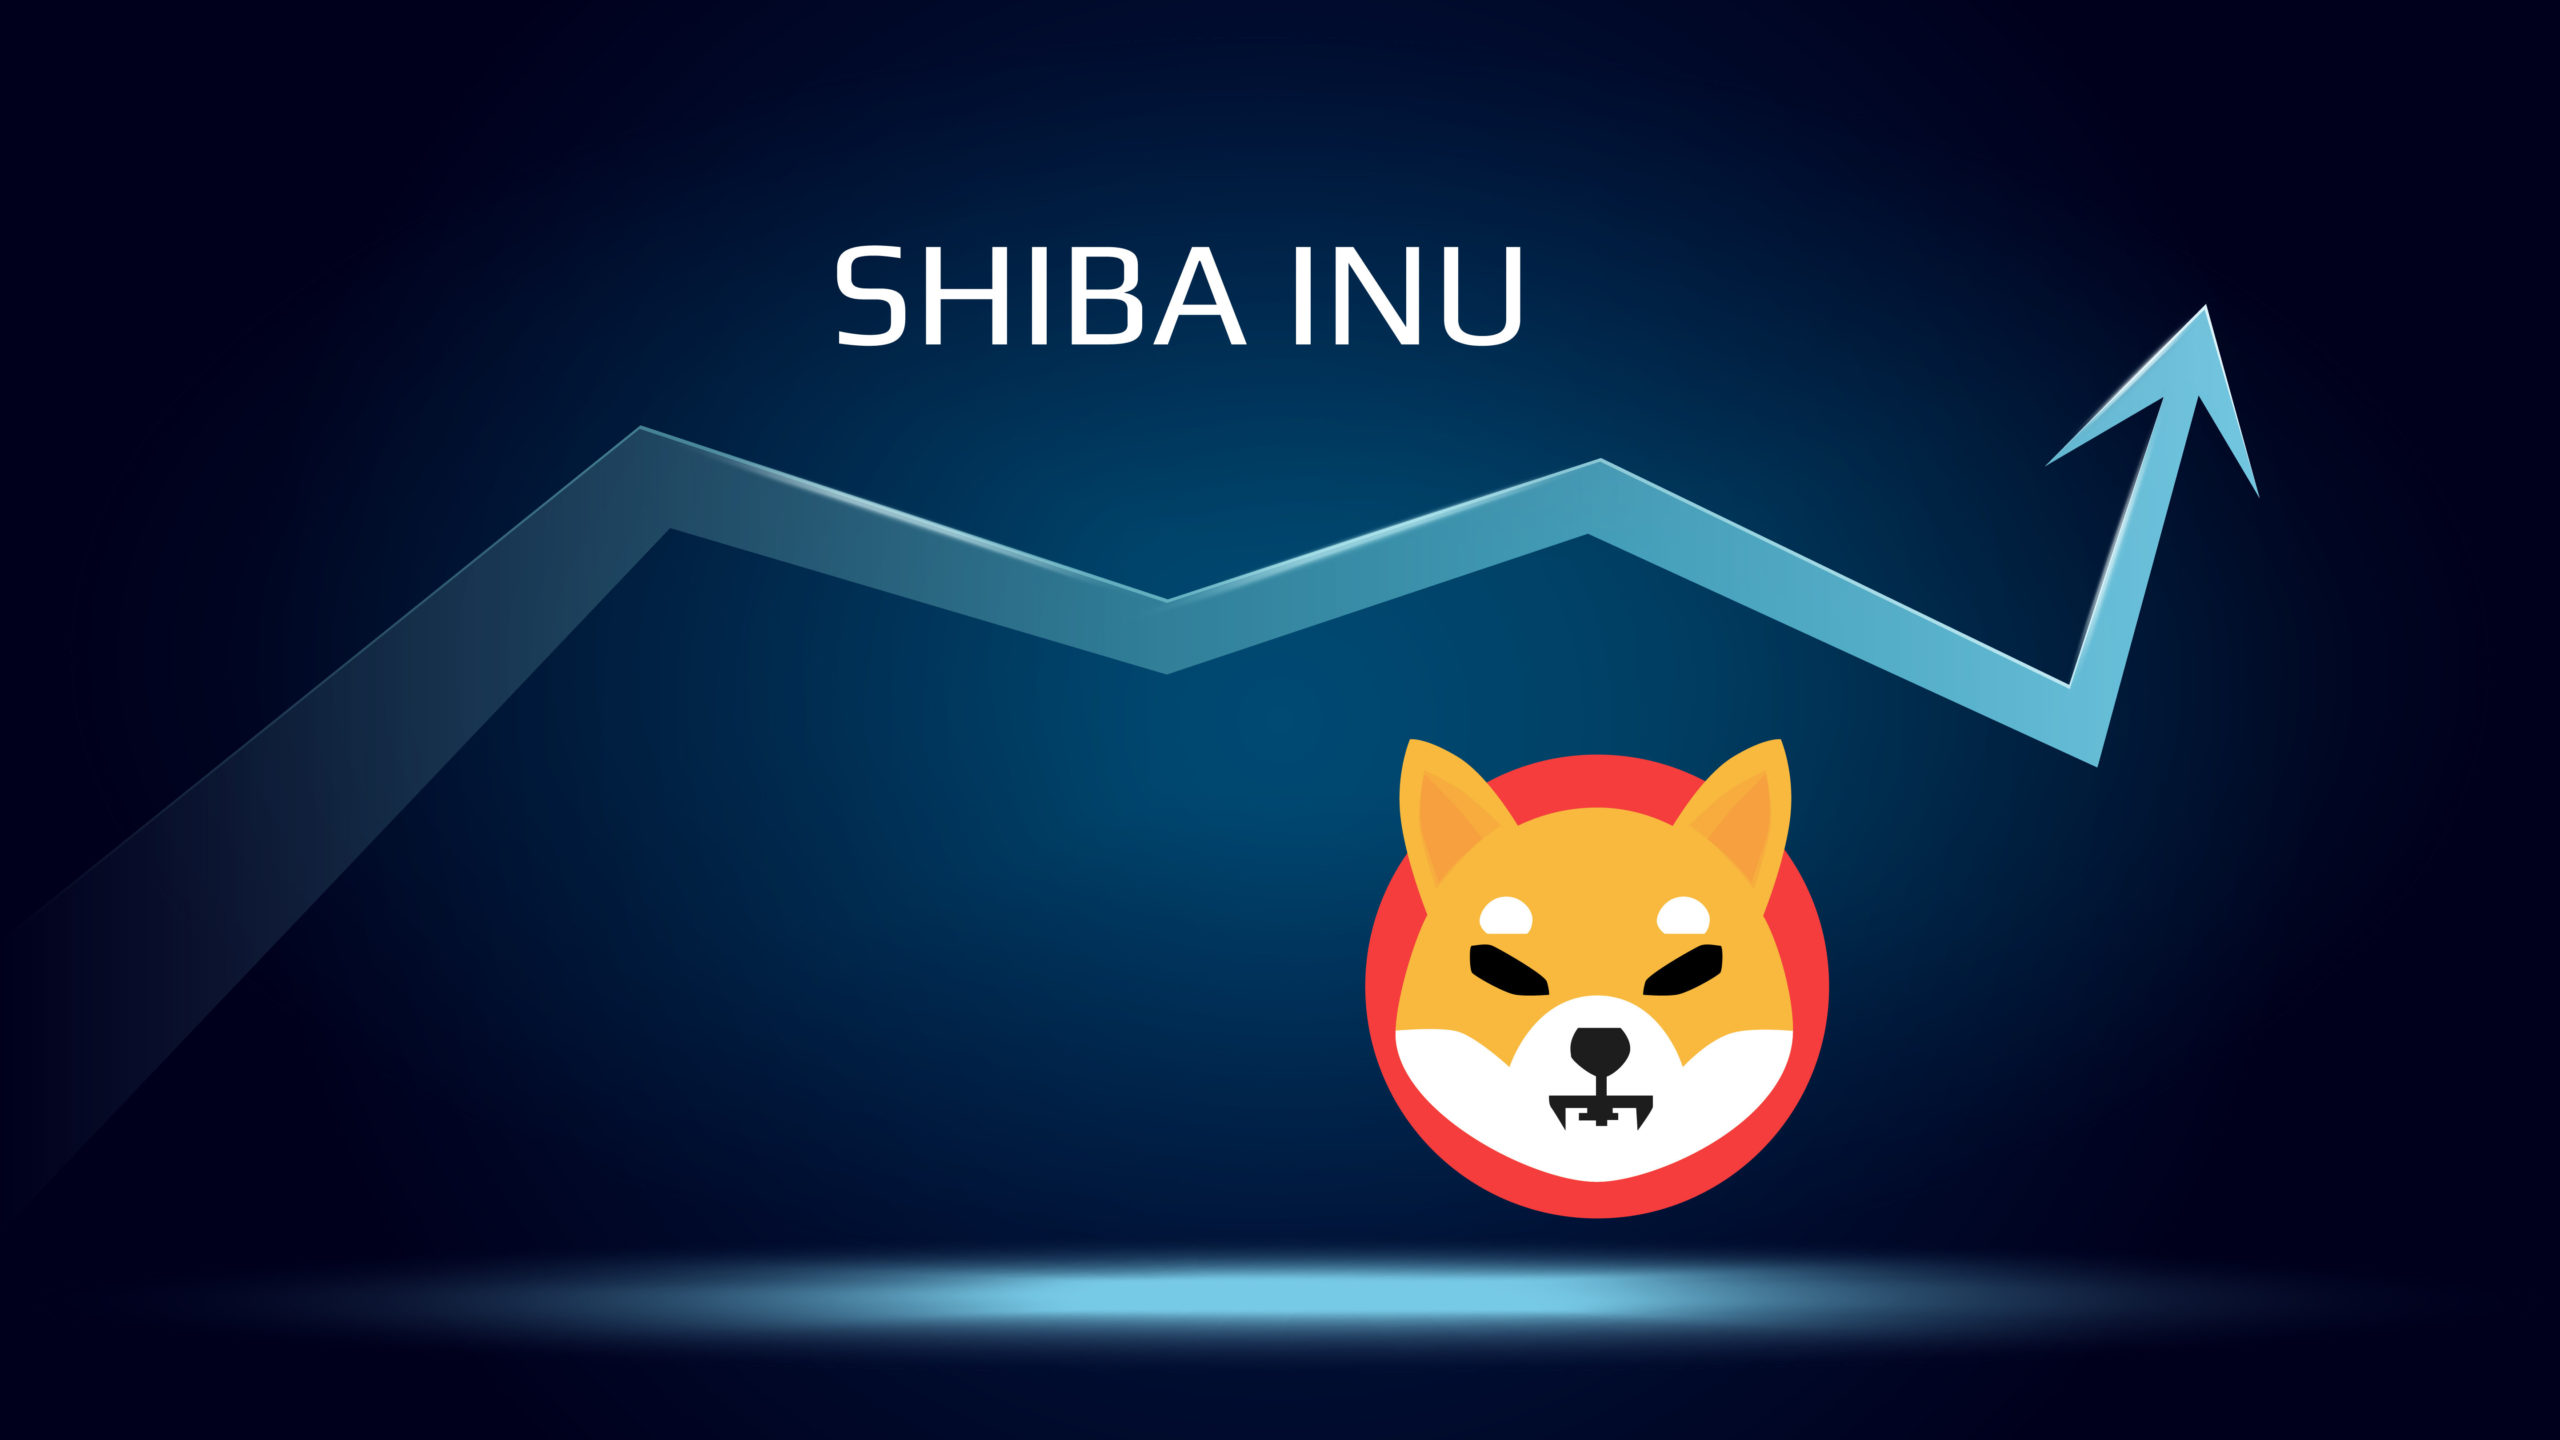 What is Shiba Inu coin?